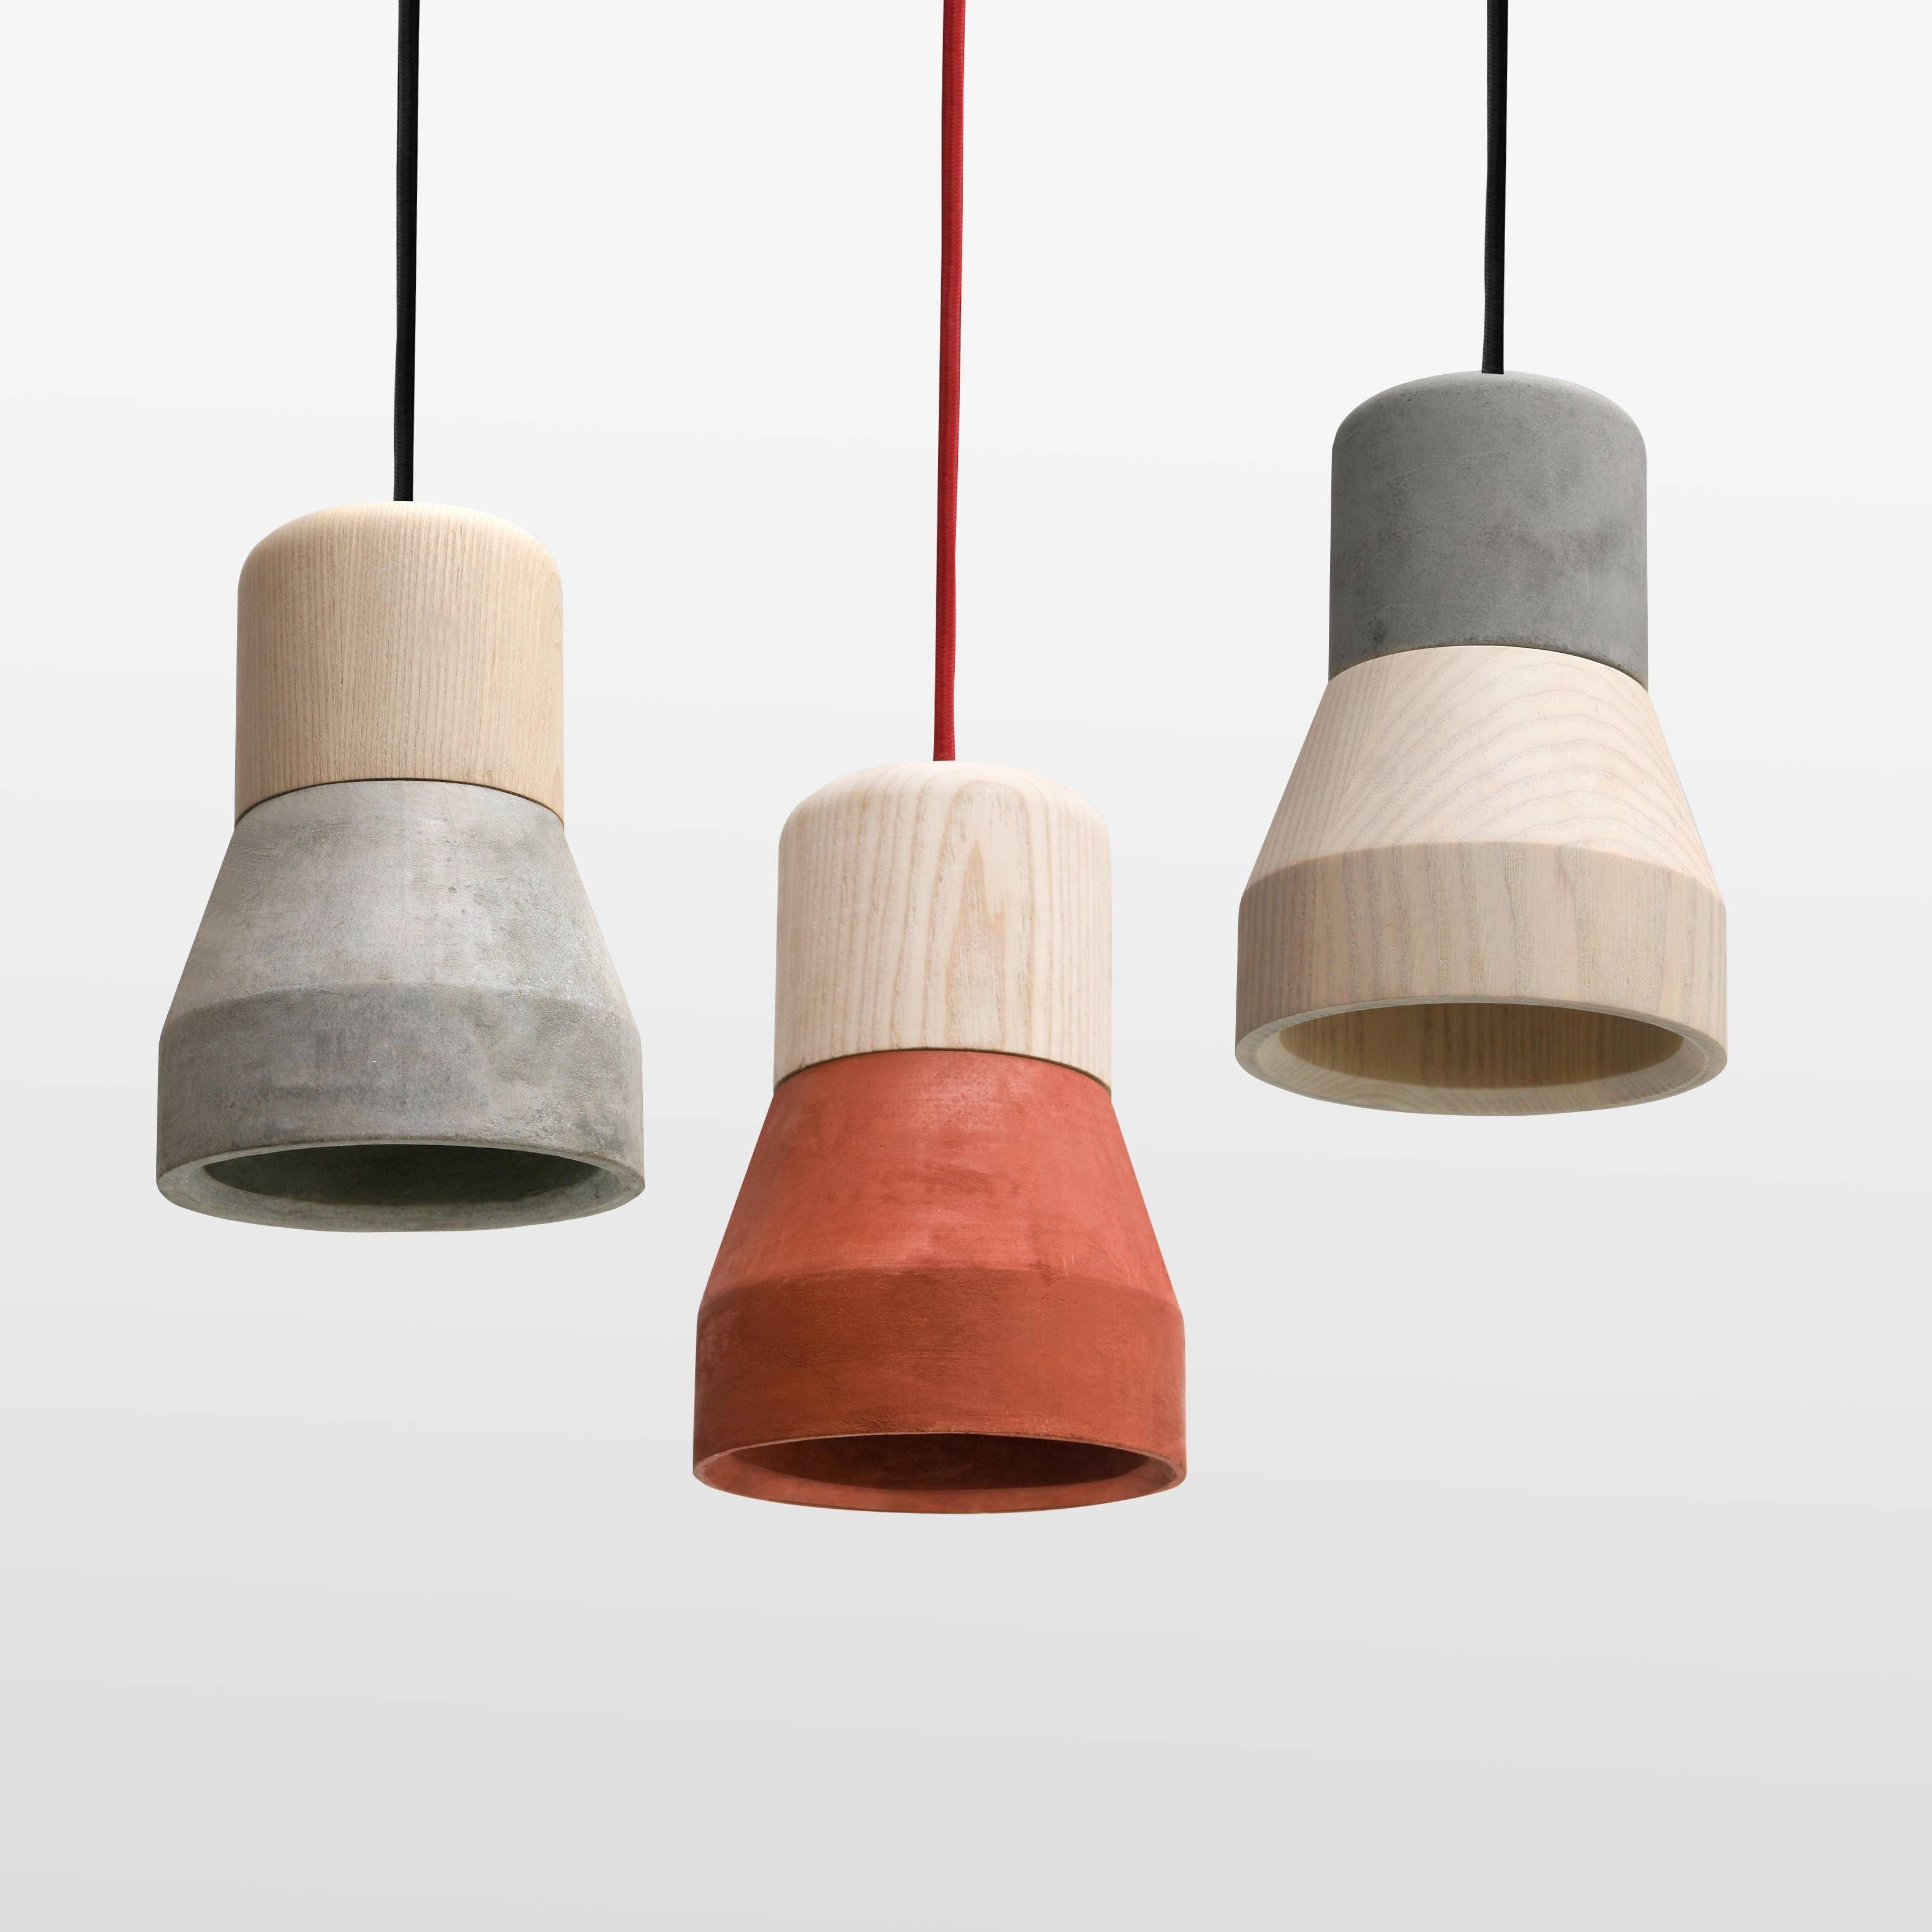 Articles With Wooden Bead Pendant Light Australia Tag: Wooden Regarding Wooden Pendant Lights Australia (View 8 of 15)